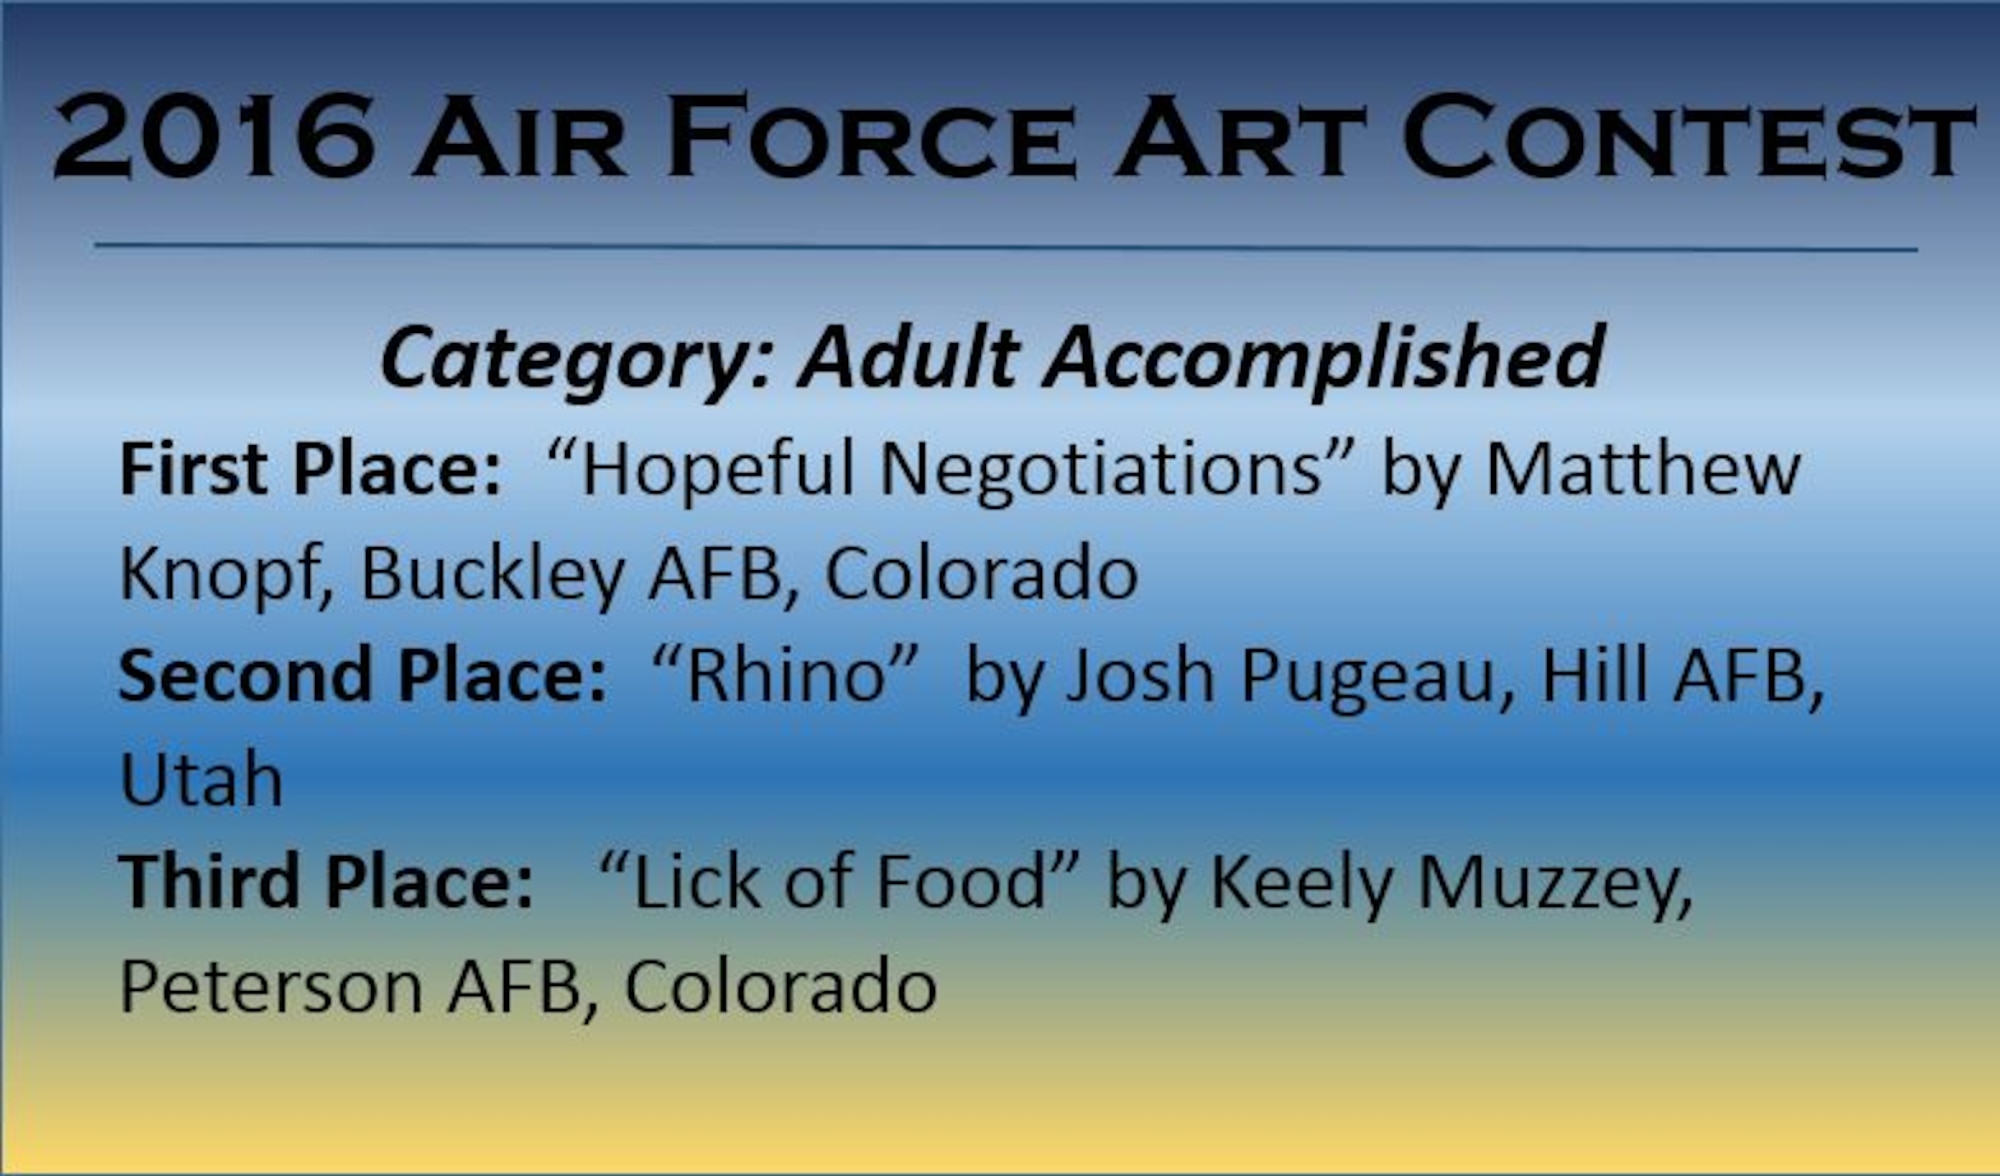 Congratulations to the 2016 Air Force Art Contest Adult Accomplished Winners